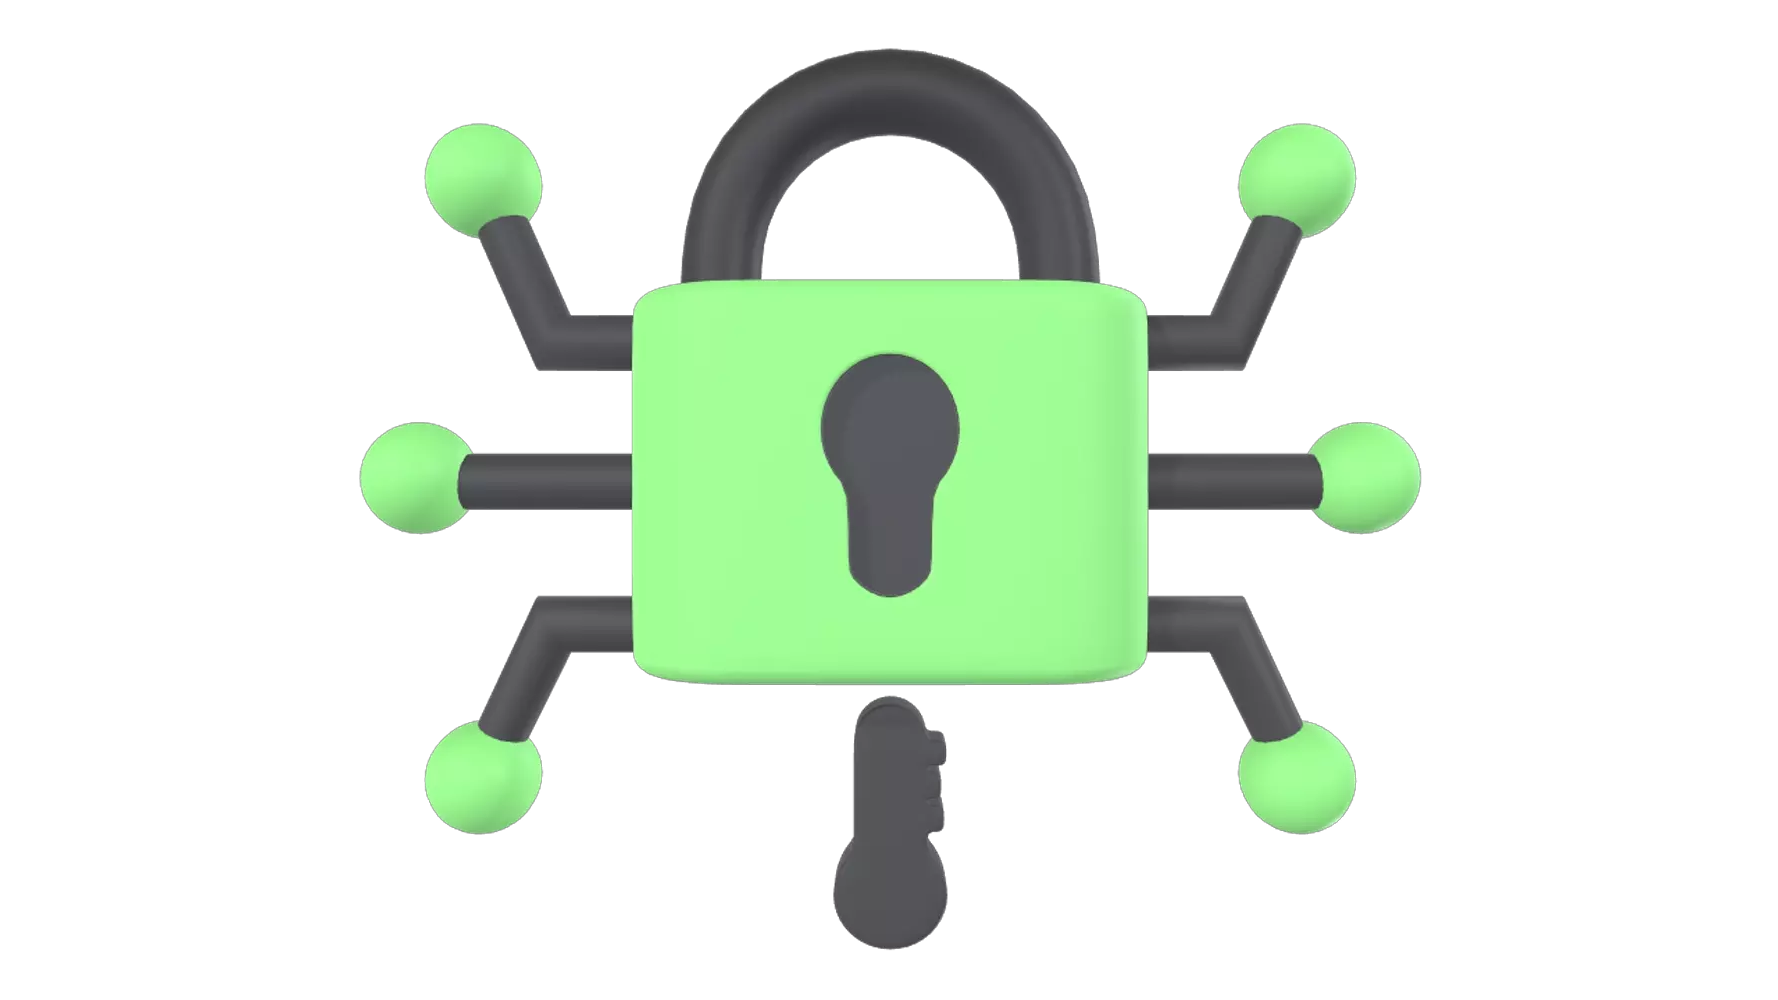 Network Security 3D Graphic